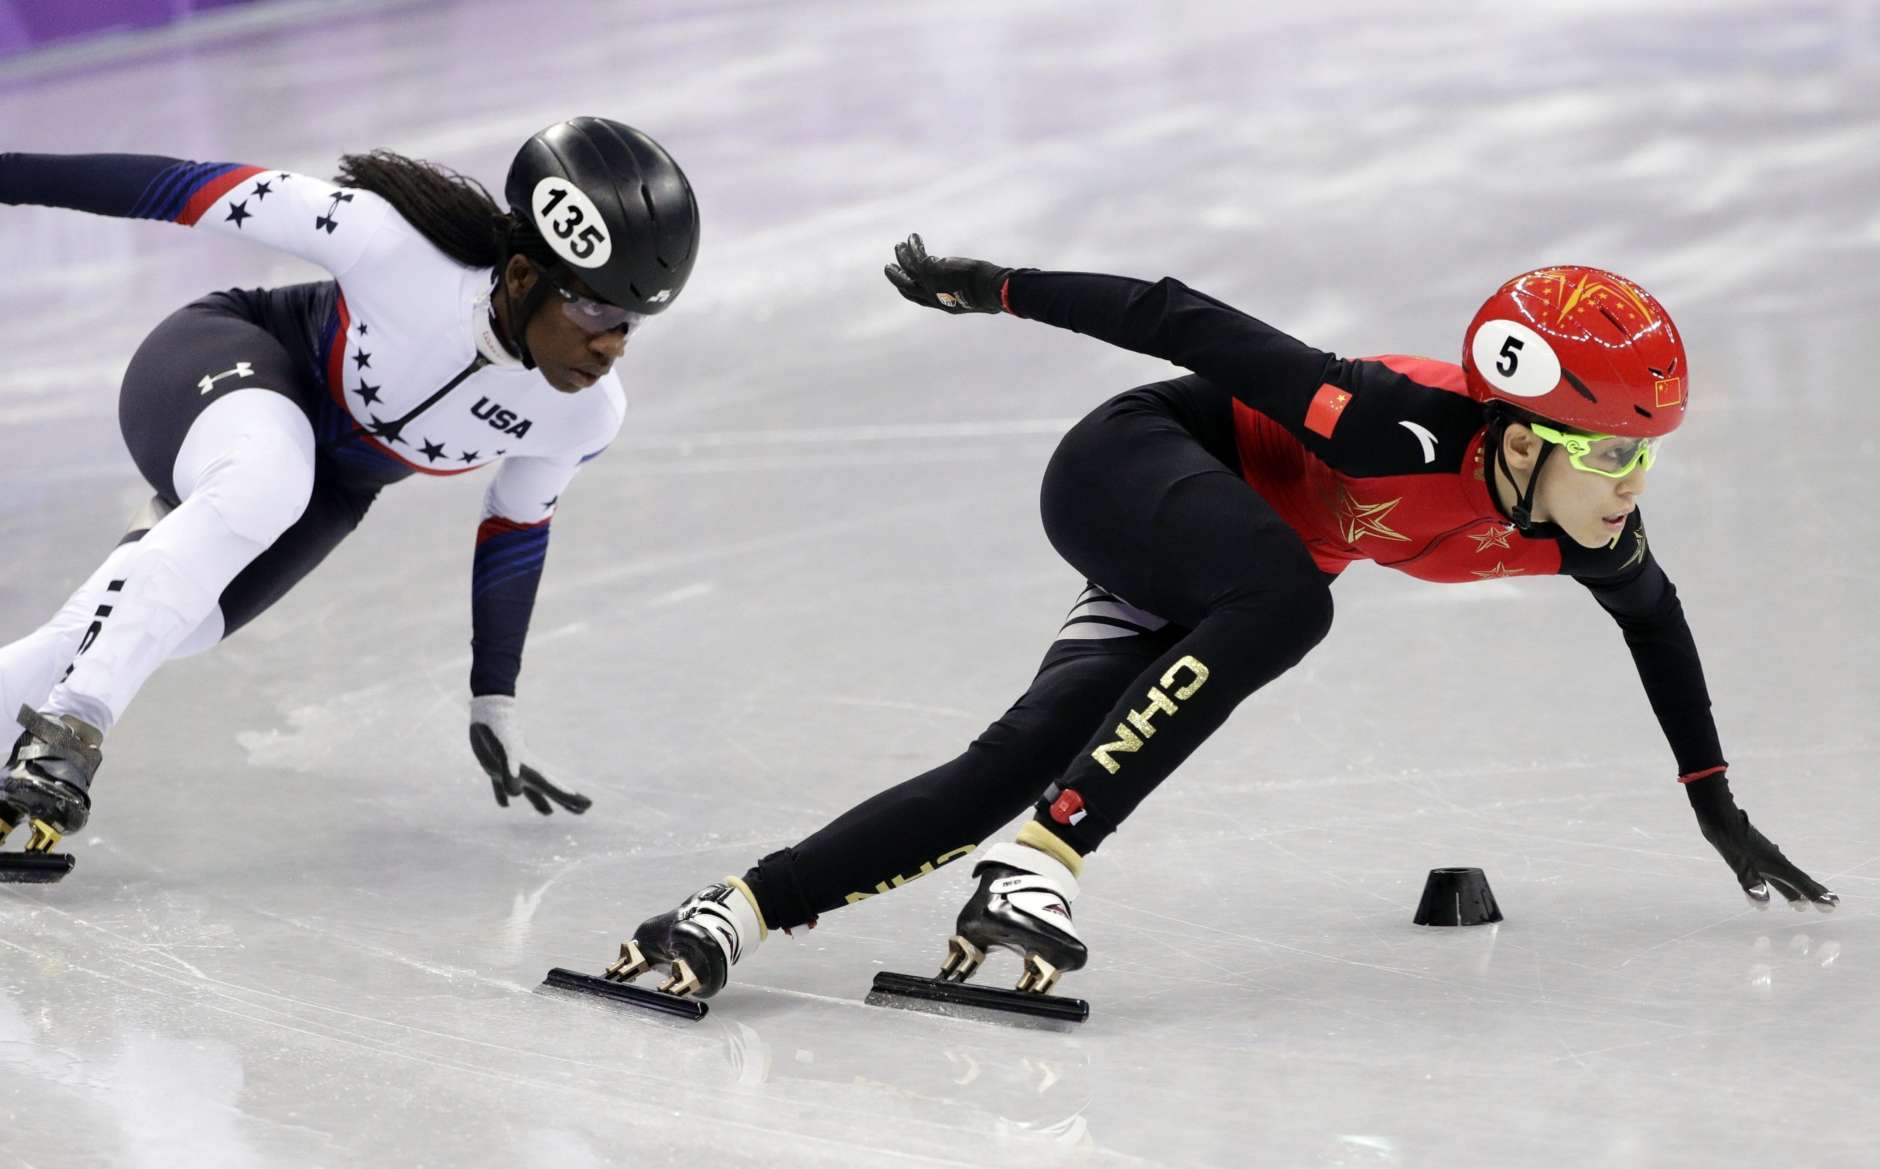 Kexin Fan of China leads Maame Biney of the United States in their ladies' 500 meters short-track speedskating heat in the Gangneung Ice Arena at the 2018 Winter Olympics in Gangneung, South Korea, Saturday, Feb. 10, 2018. (AP Photo/David J. Phillip)